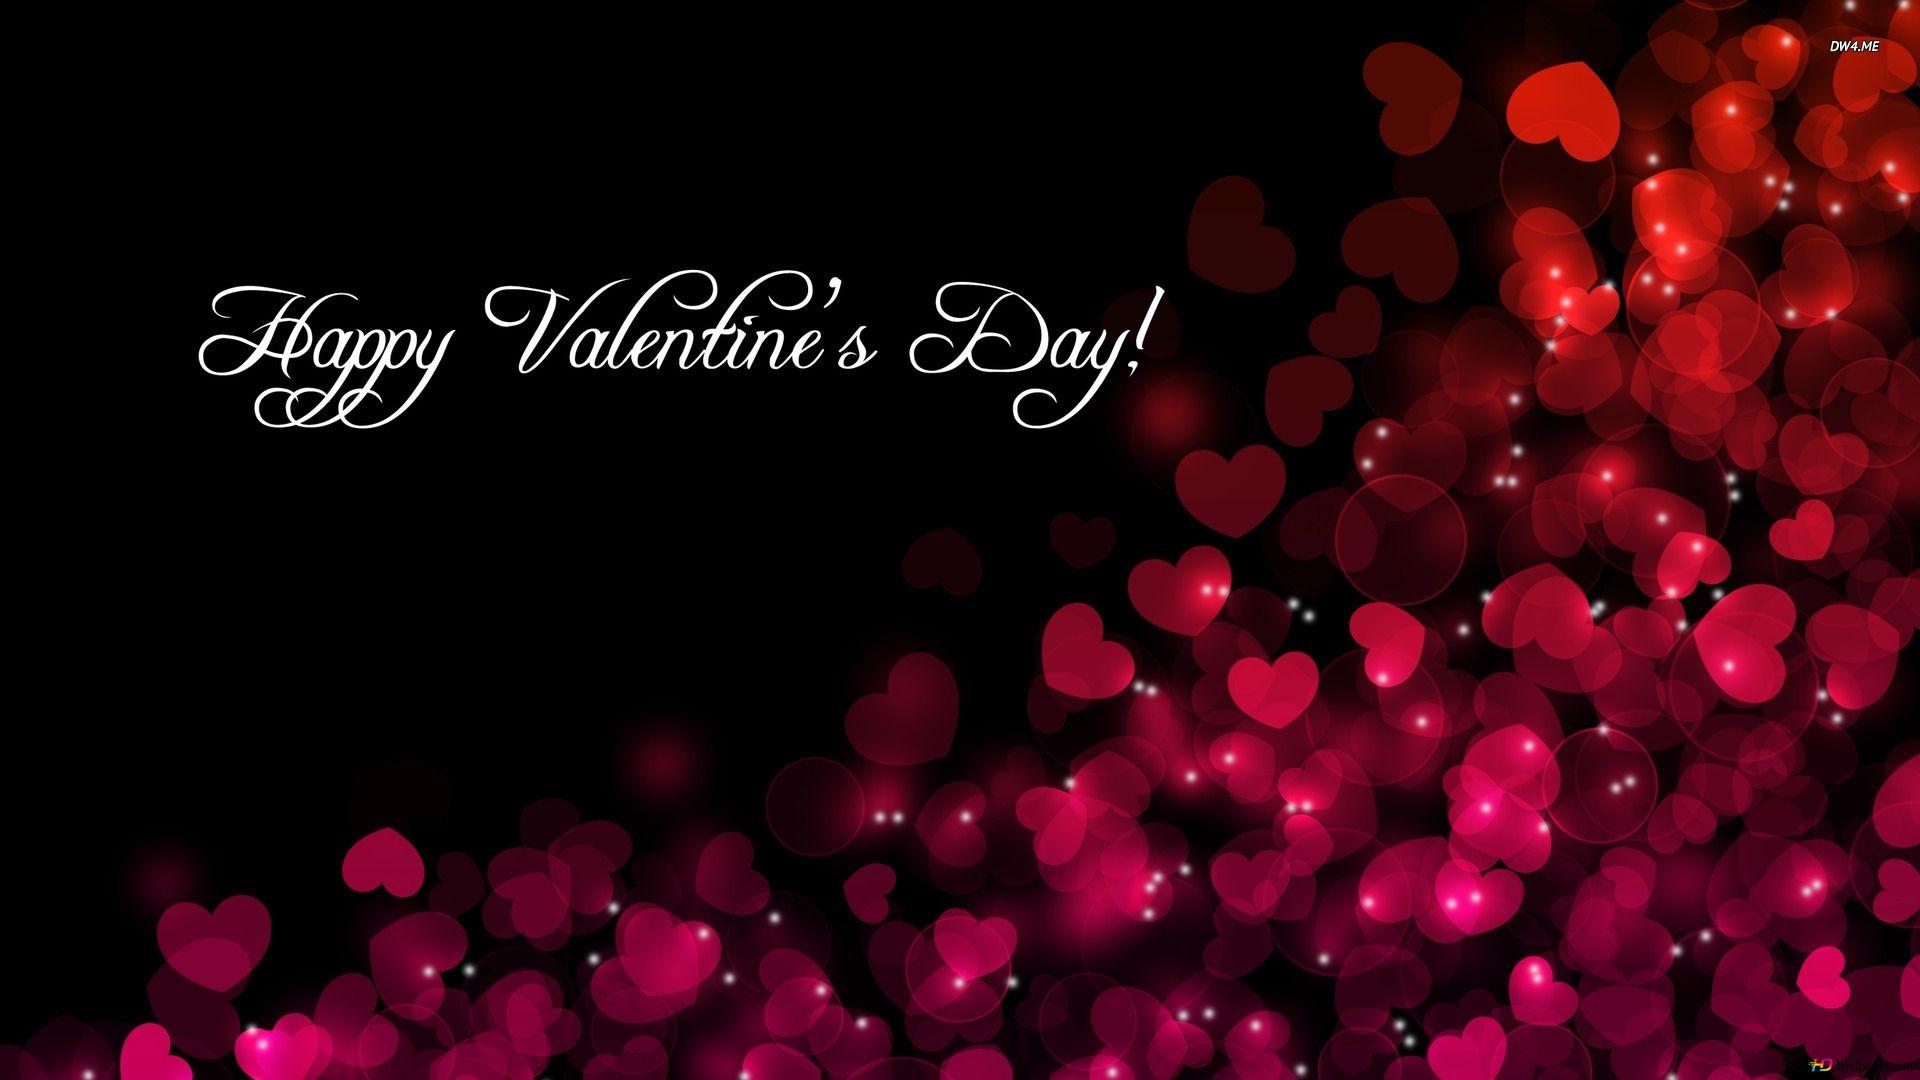 Red little hearts happy valentine's day lettering and black background HD wallpaper download